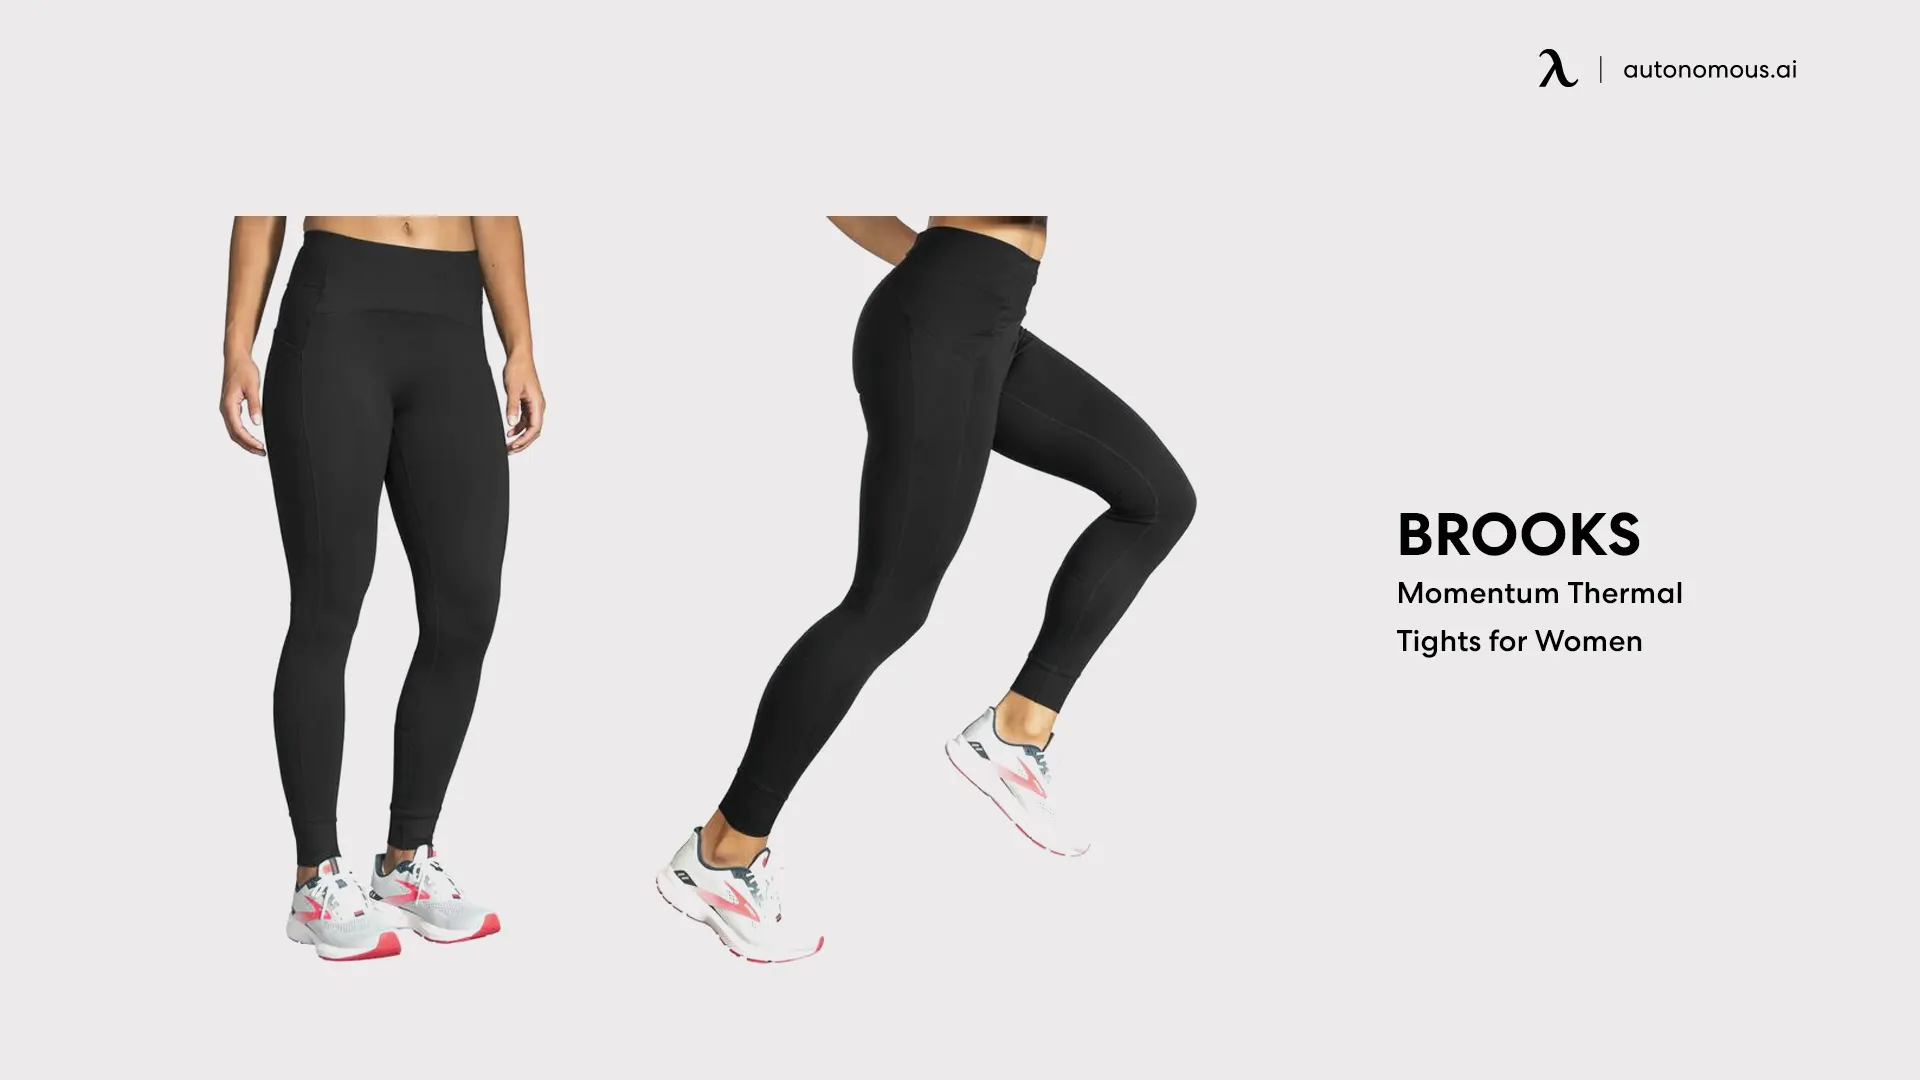 Brooks Momentum Thermal Tights for Women